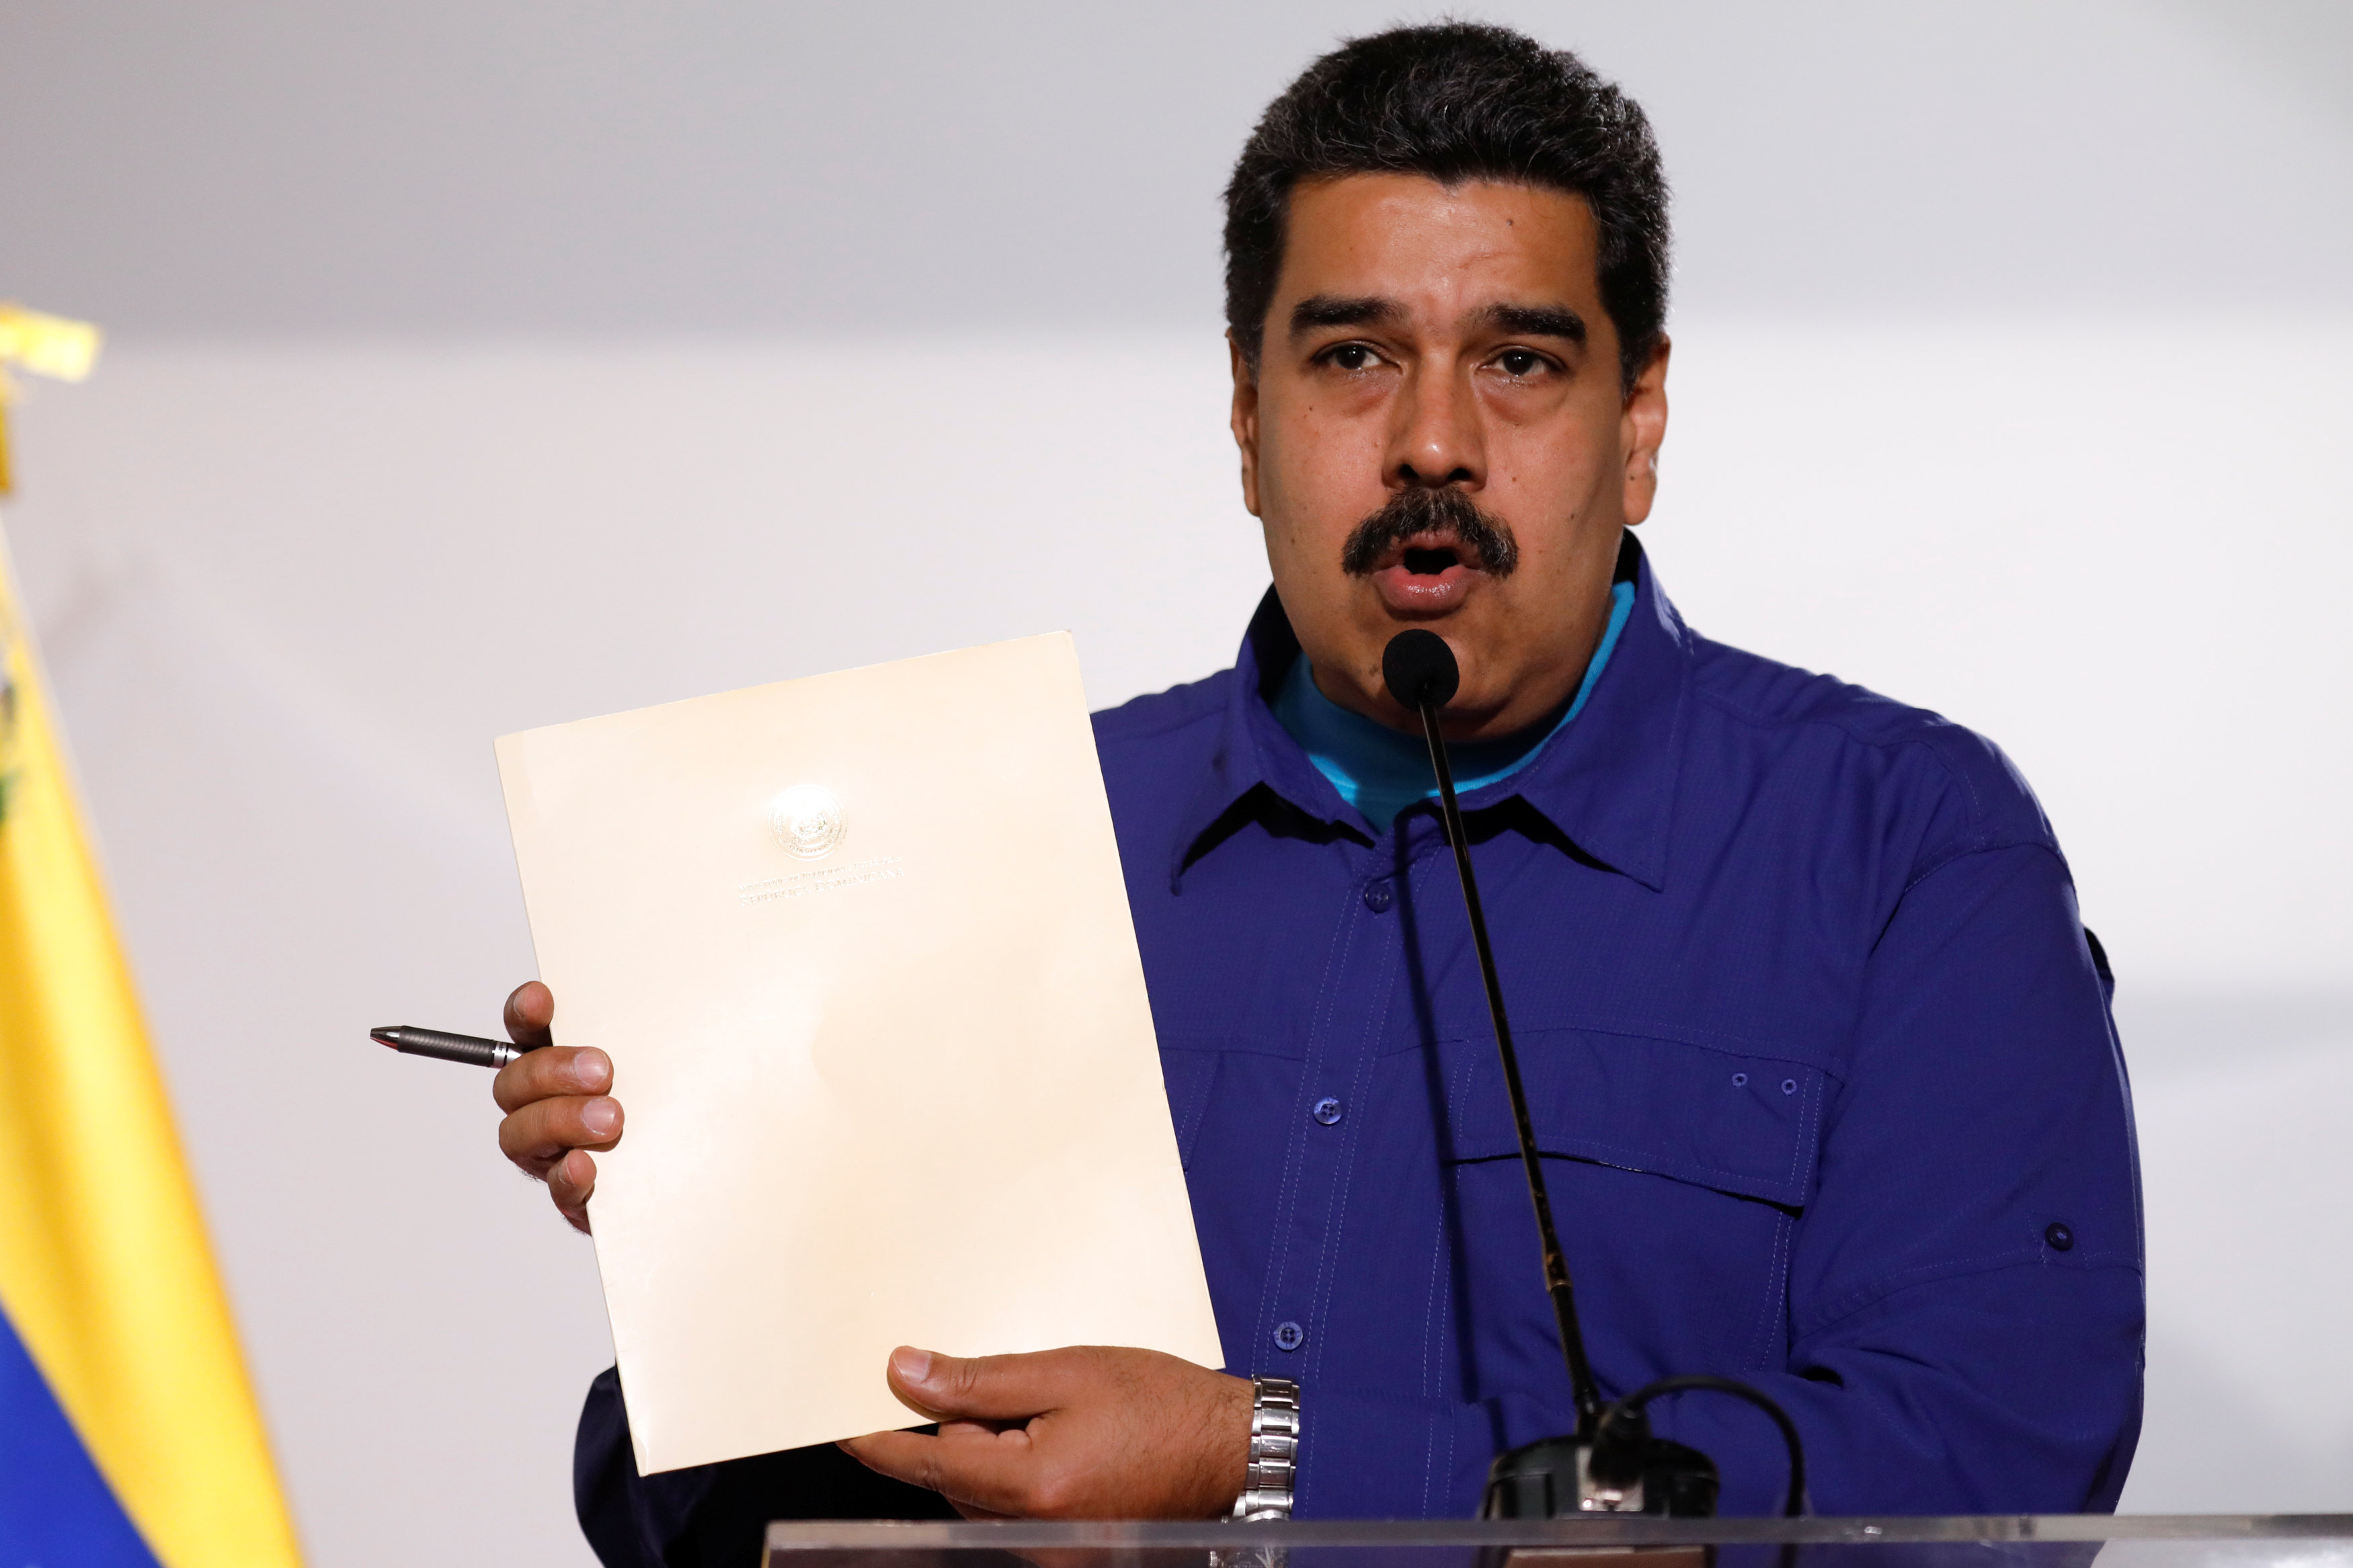 Venezuela's President Nicolas Maduro holds a document as he talks to the media before an event with supporters of Somos Venezuela (We are Venezuela) movement in Caracas, Venezuela February 7, 2018.